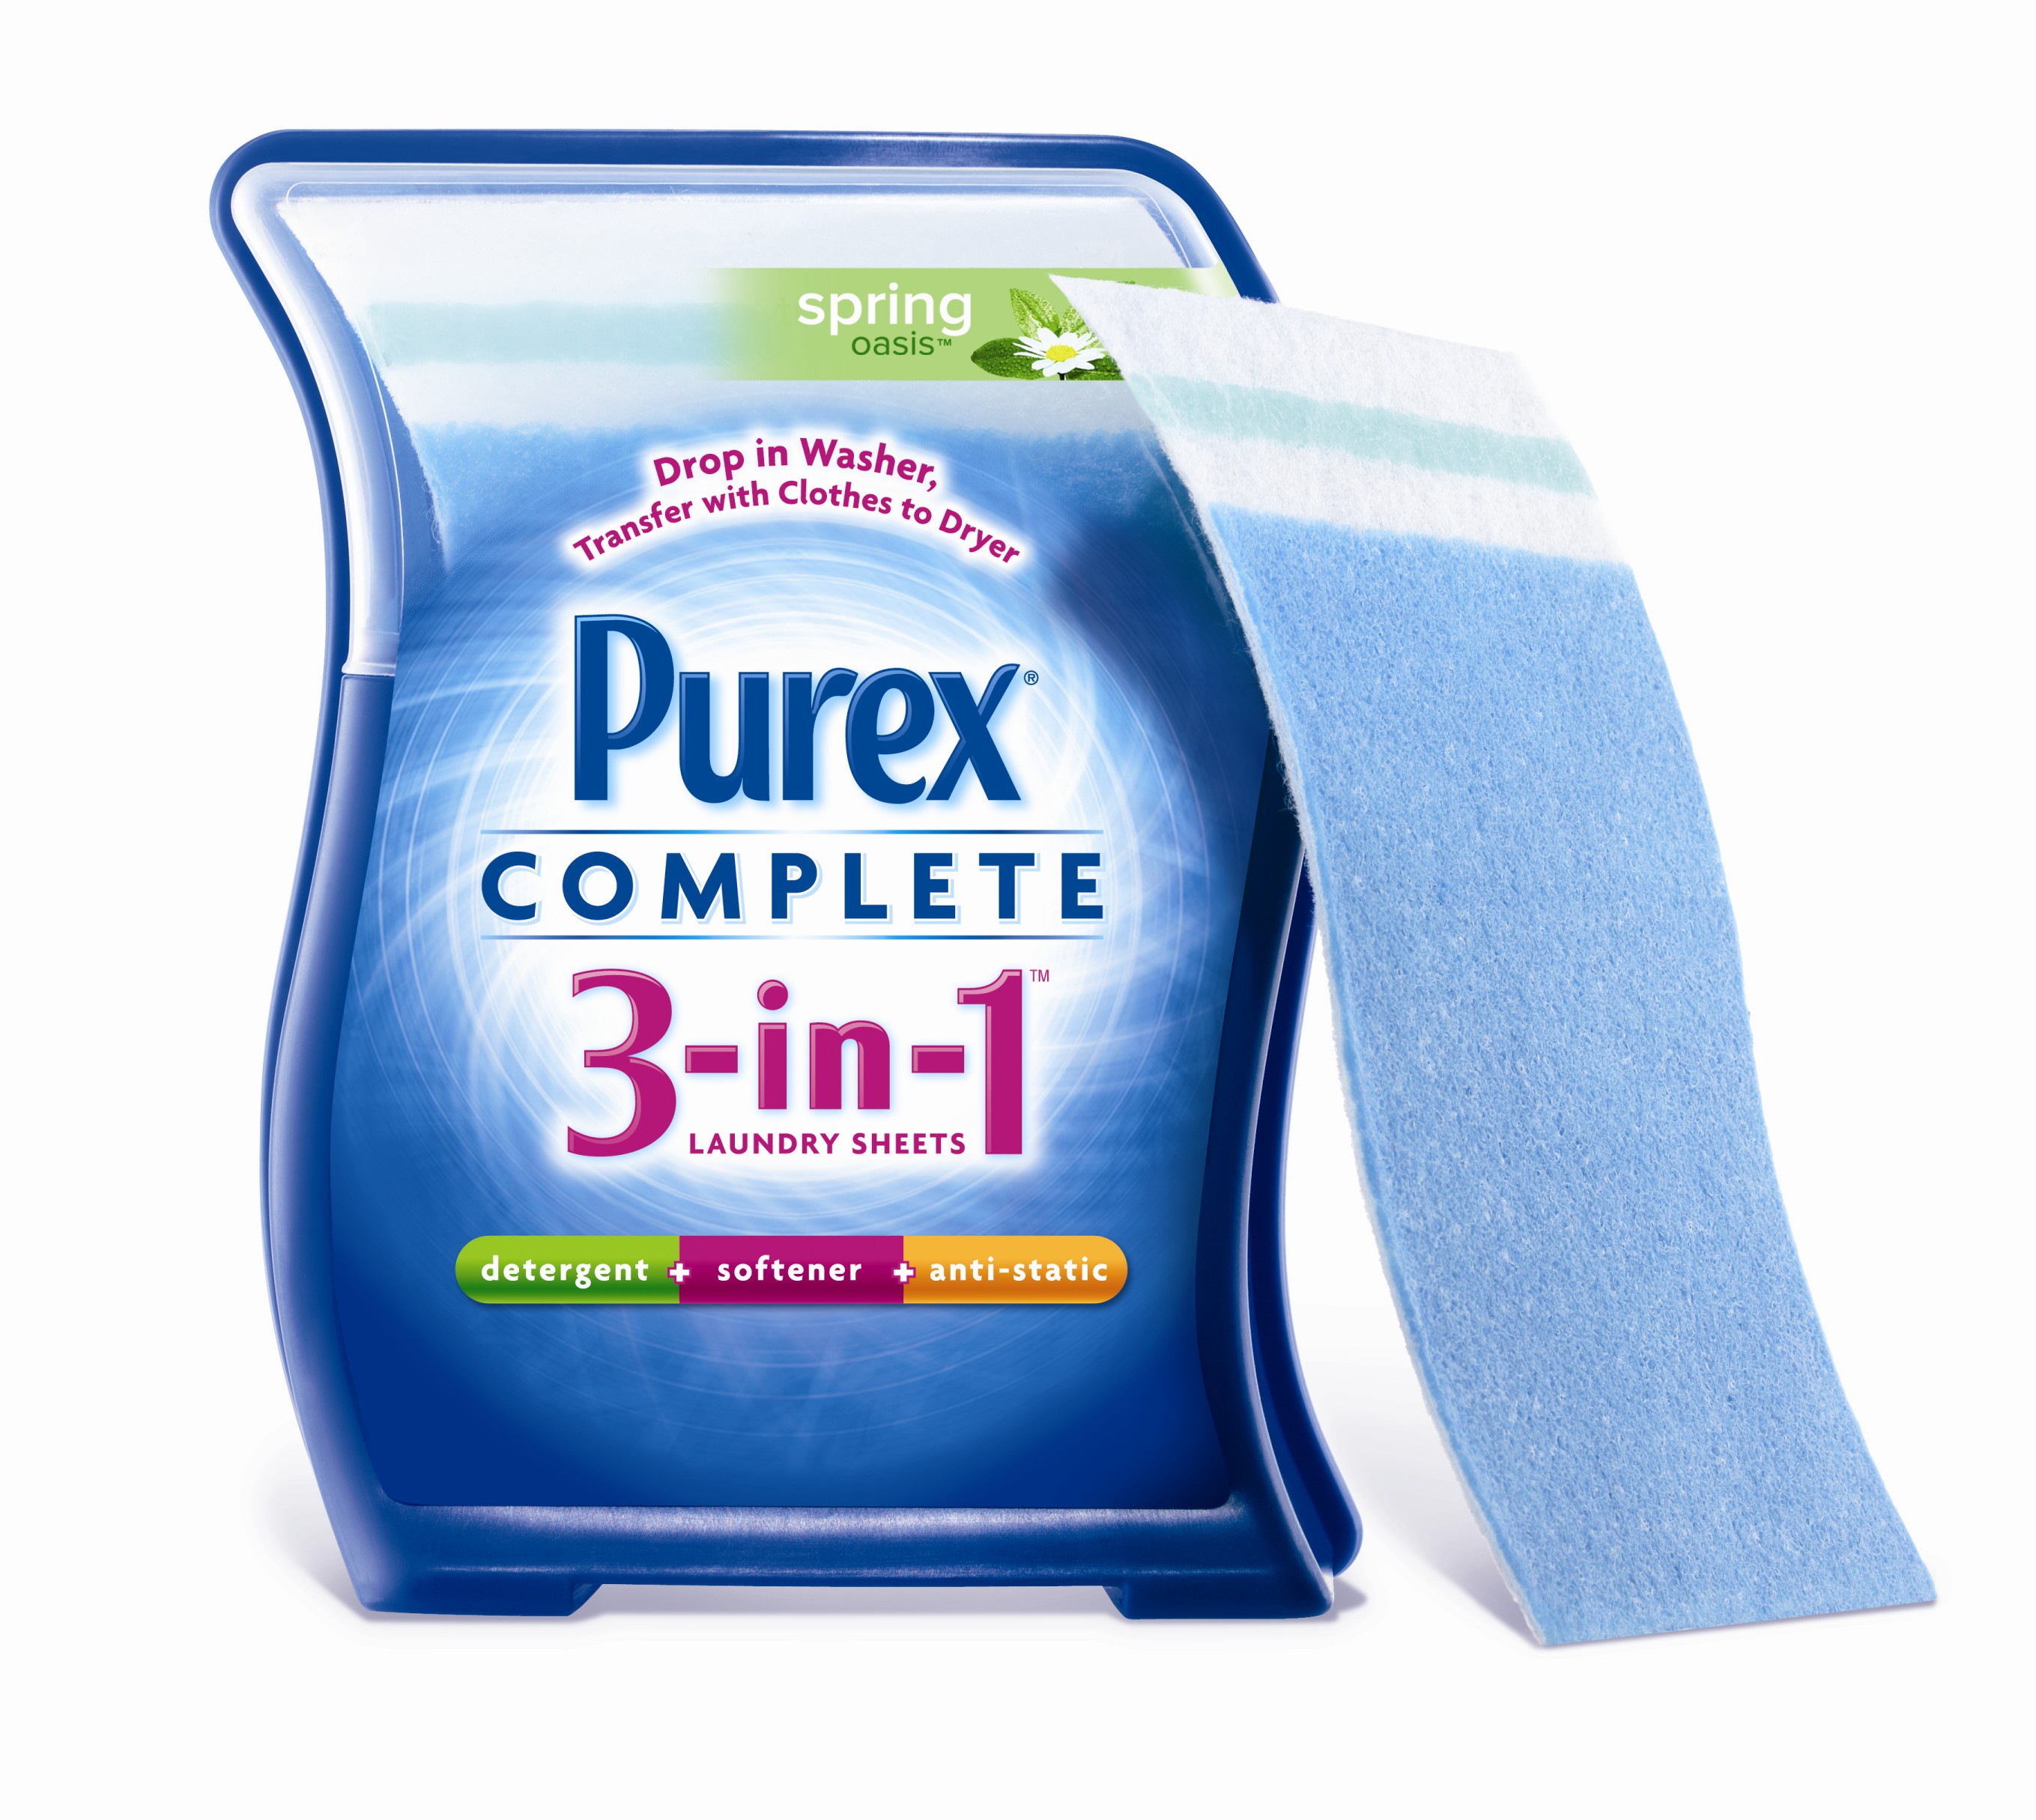 http://tripknowledgy.com/wp-content/uploads/2012/06/Purex_3in1_Hero_Image_small_121256_300dpi_1772H_1772W.jpg